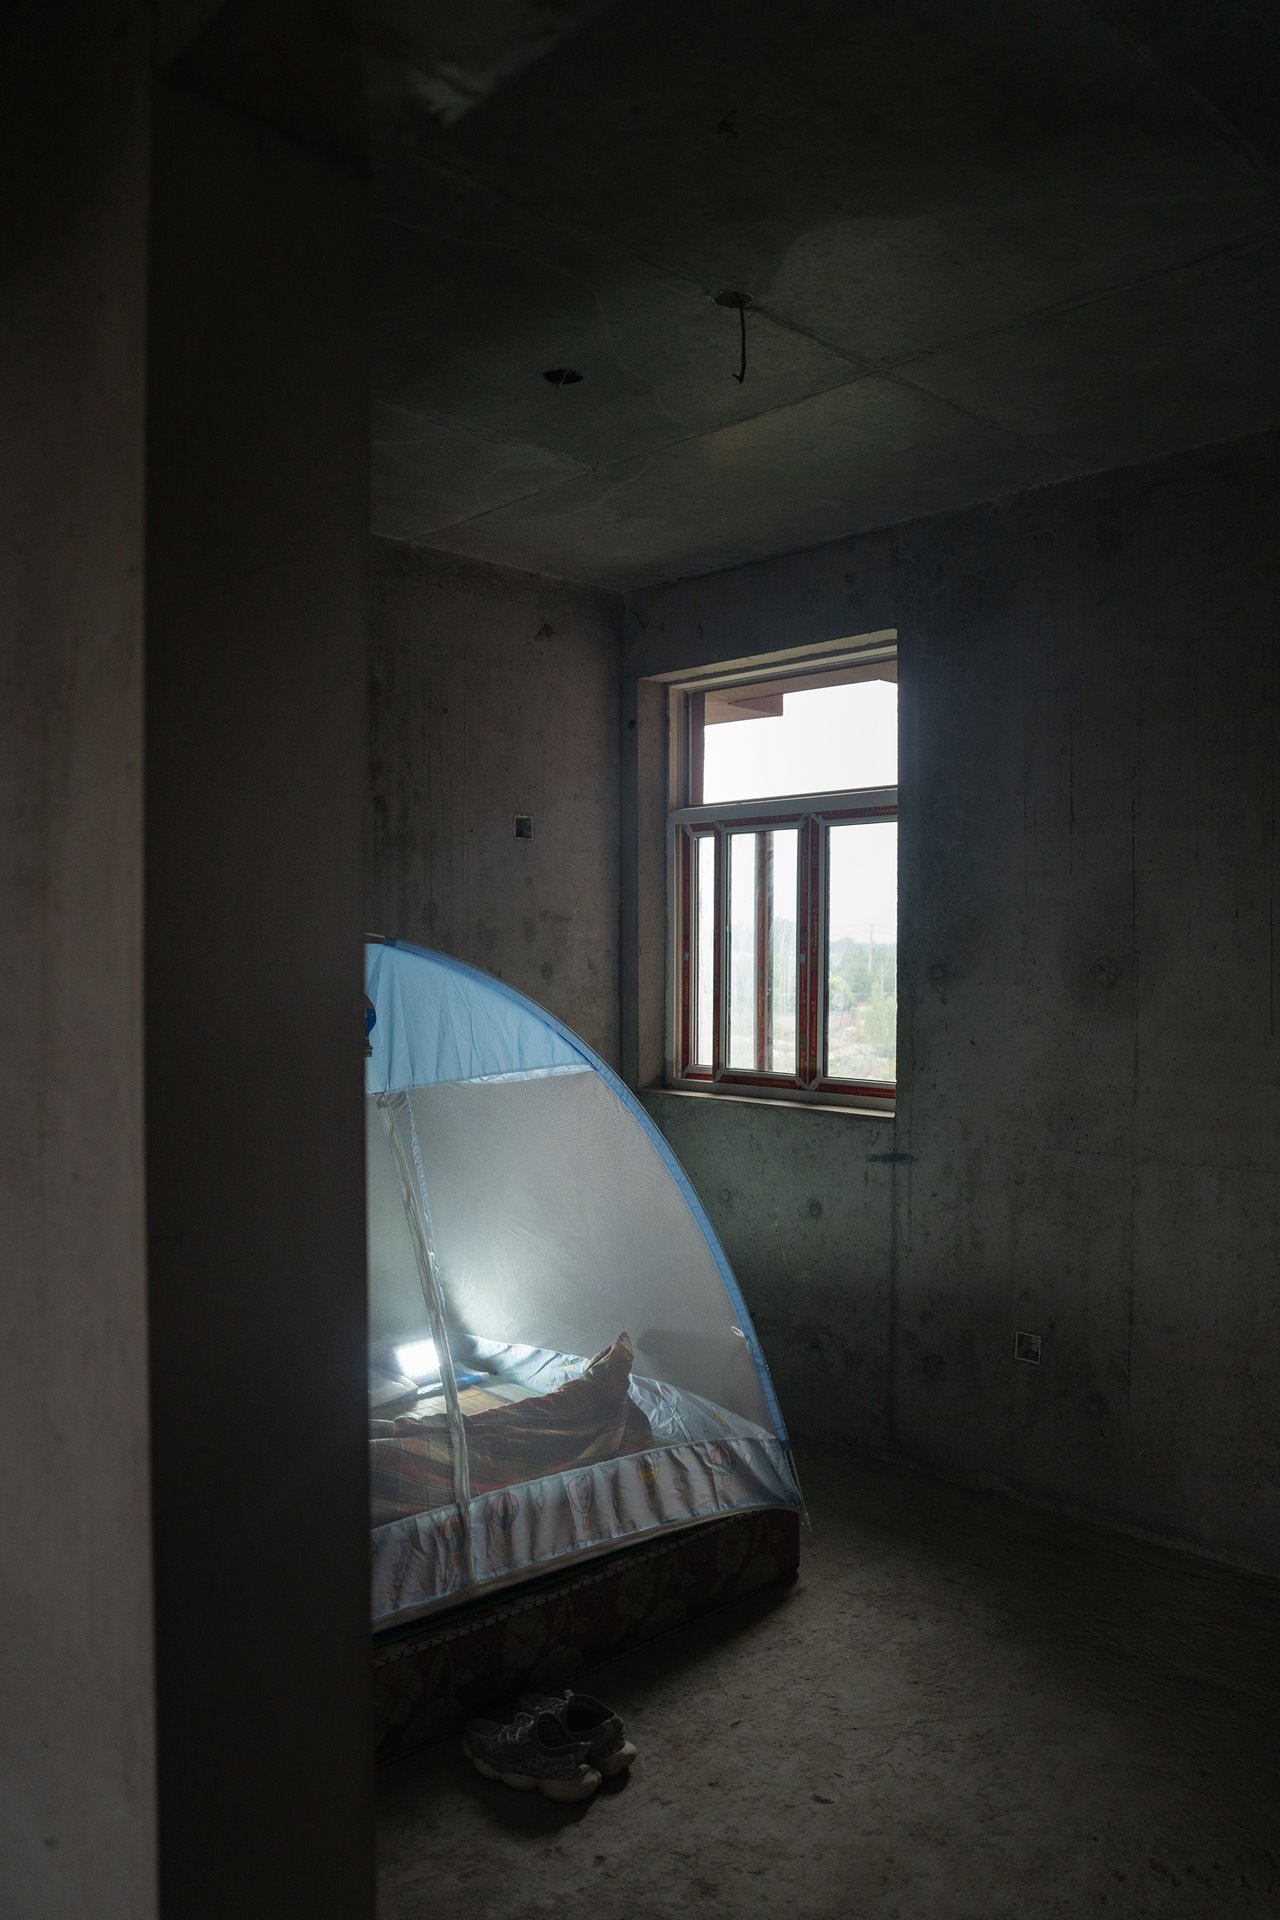 Summers in Xi&rsquo;an, China are hot and humid. This particular unfinished home did not have windows or doors installed. The homeowner installed his own windows and set up nets to keep mosquitos away.&nbsp;